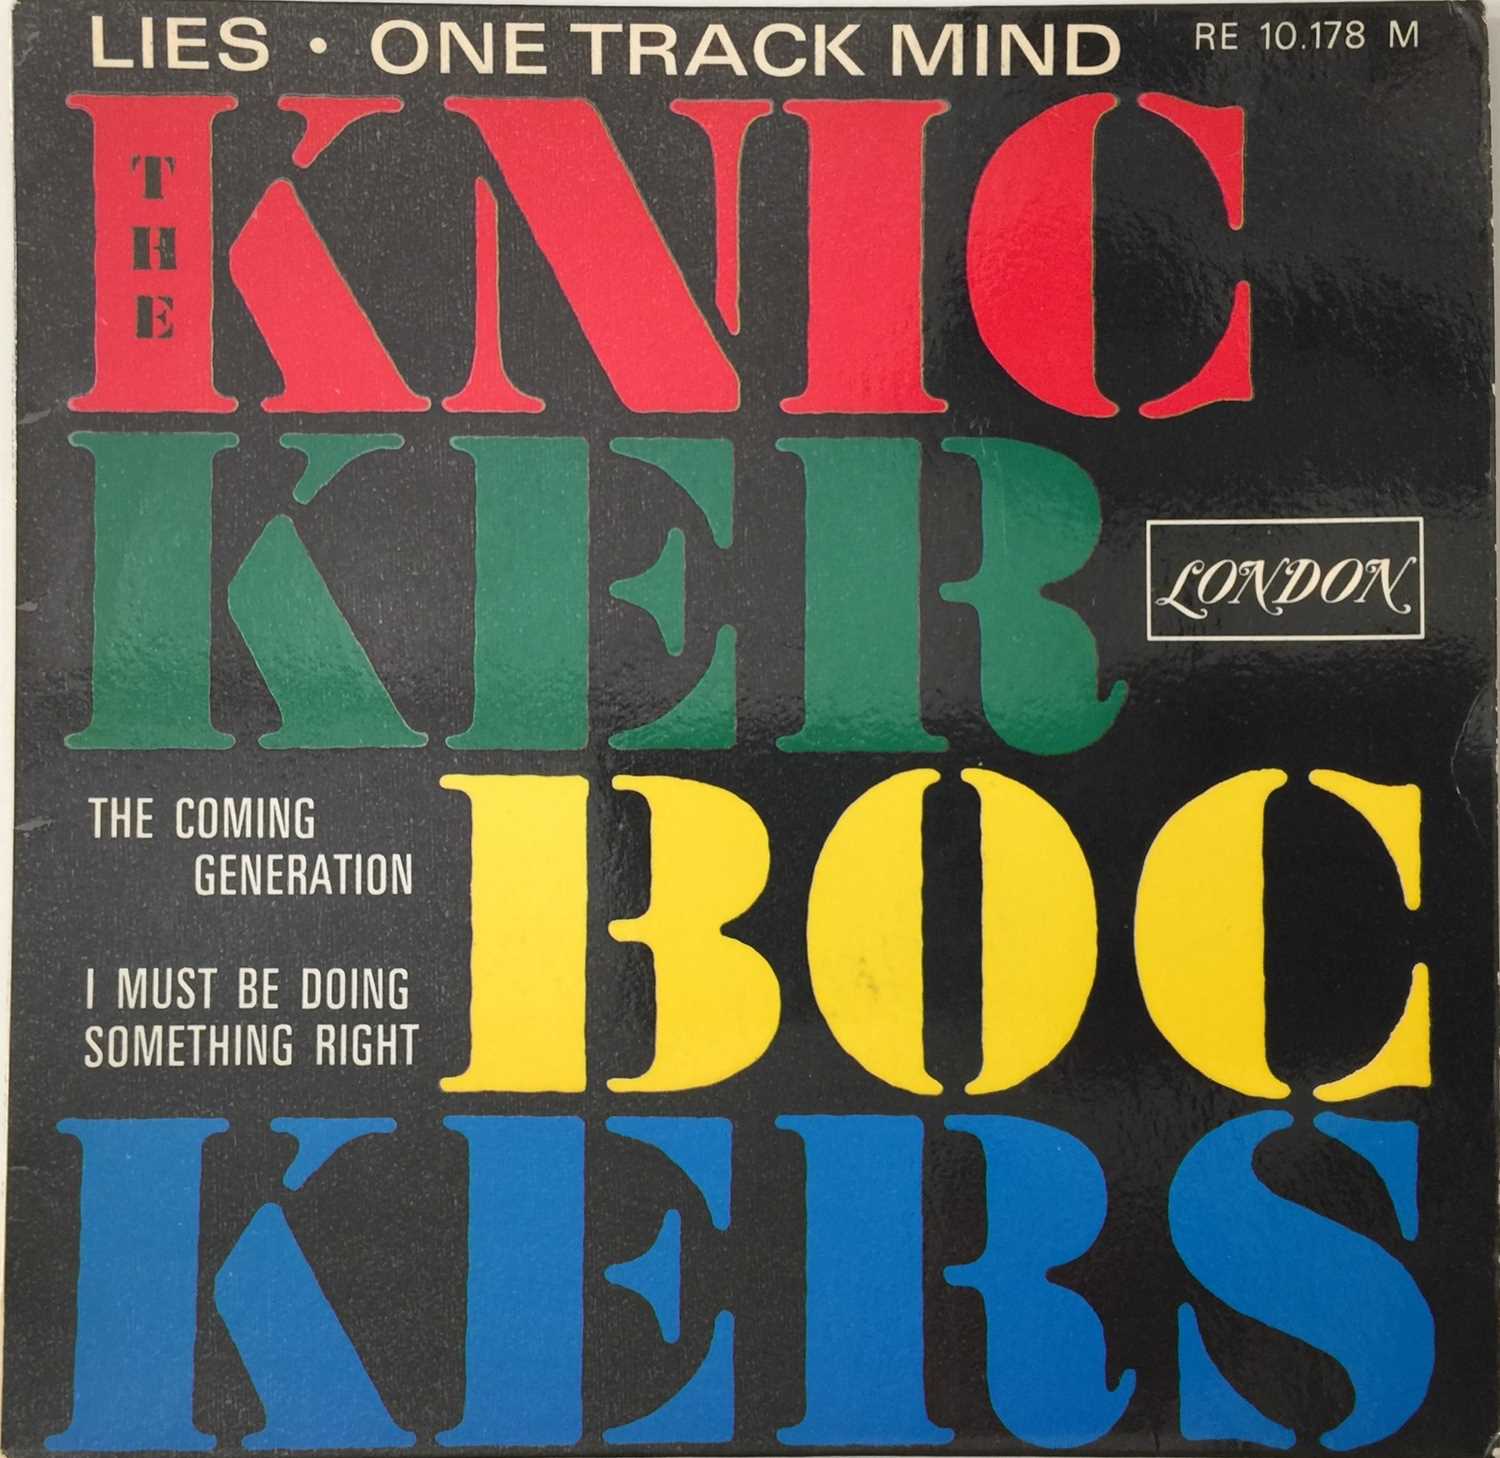 THE KNICKERBOCKERS - LIES/ONE TRACK MIND EP (ORIGINAL FRENCH RELEASE - LONDON REH 10.178) - Image 2 of 5